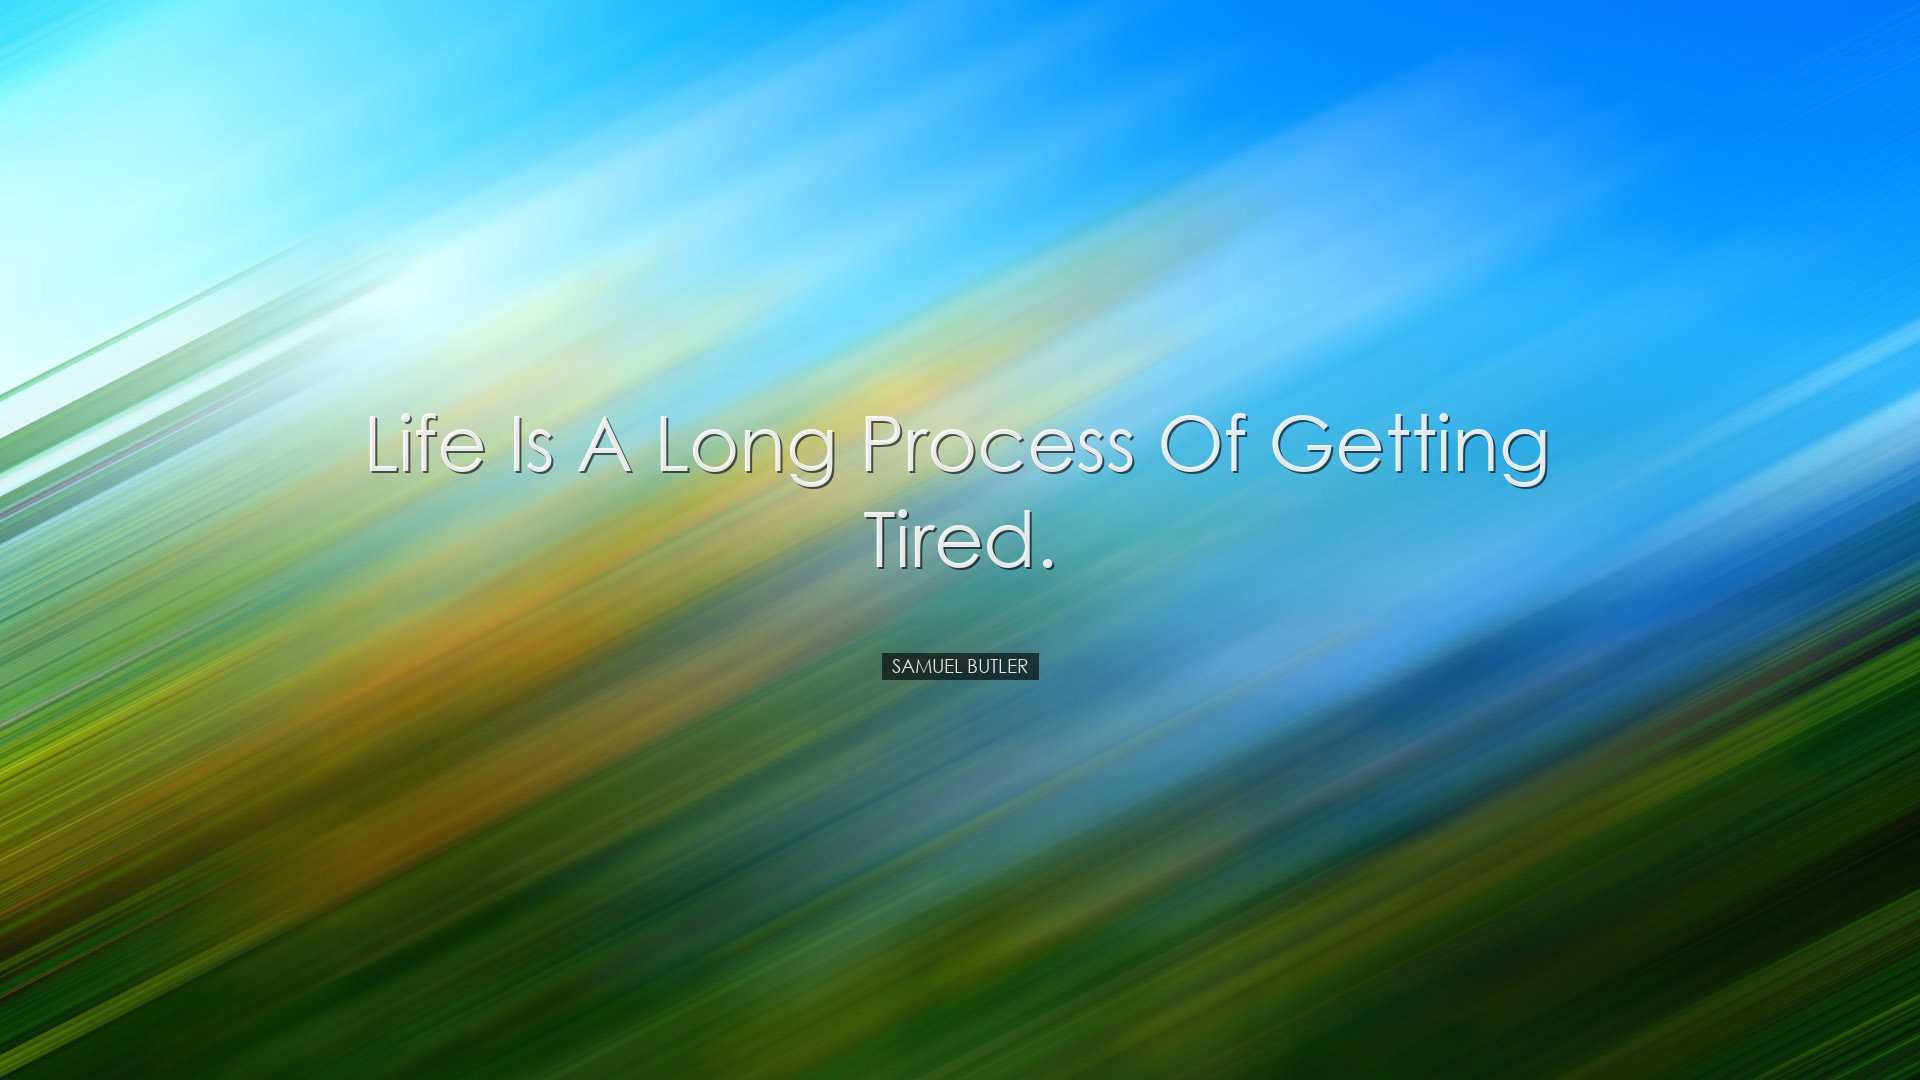 Life is a long process of getting tired. - Samuel Butler